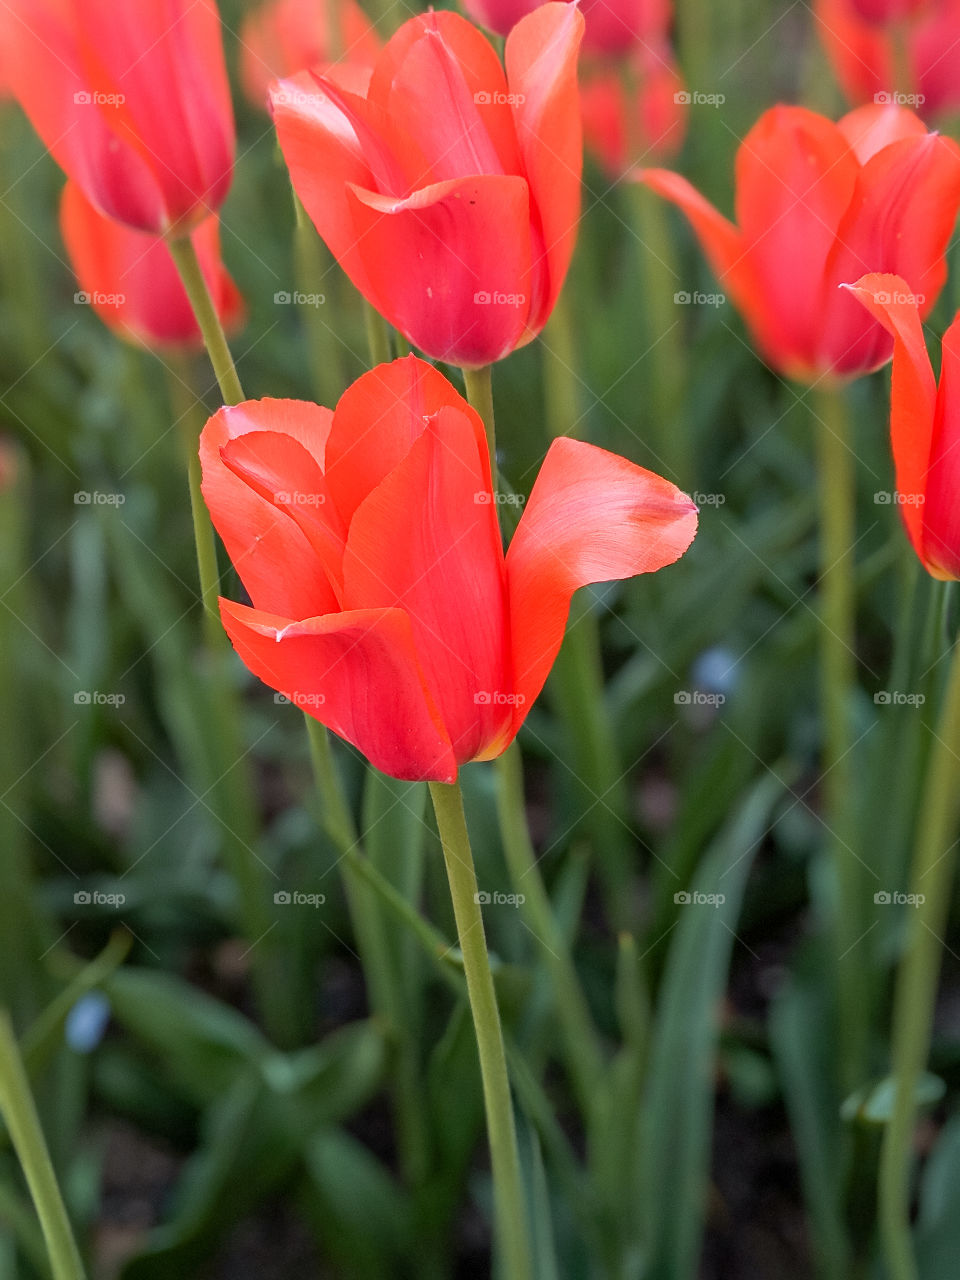 Vibrant Bright and Colorful Red Orange Tulips